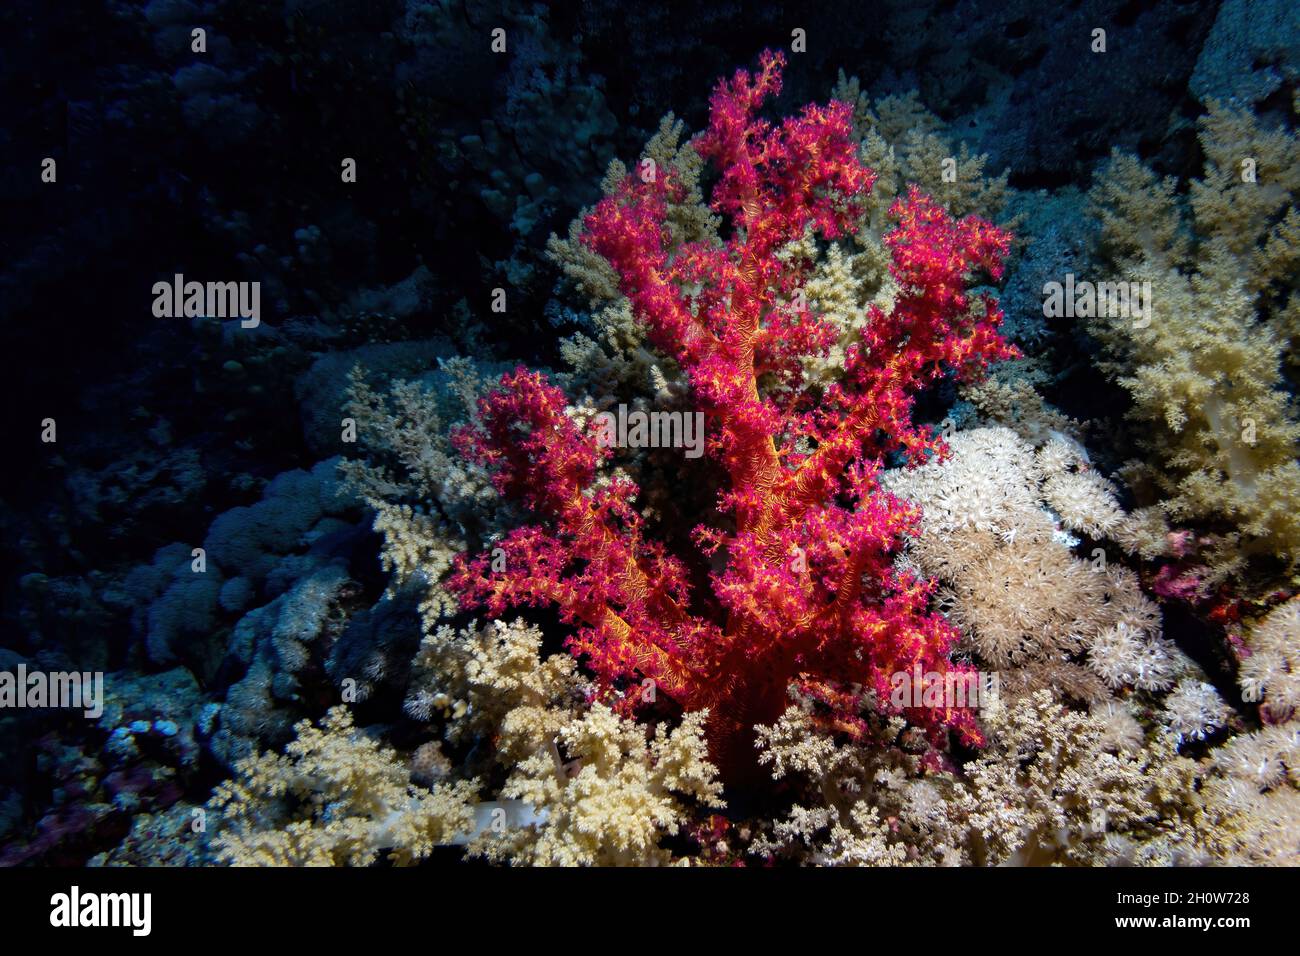 Red soft broccoli coral over dark coral reef background Stock Photo